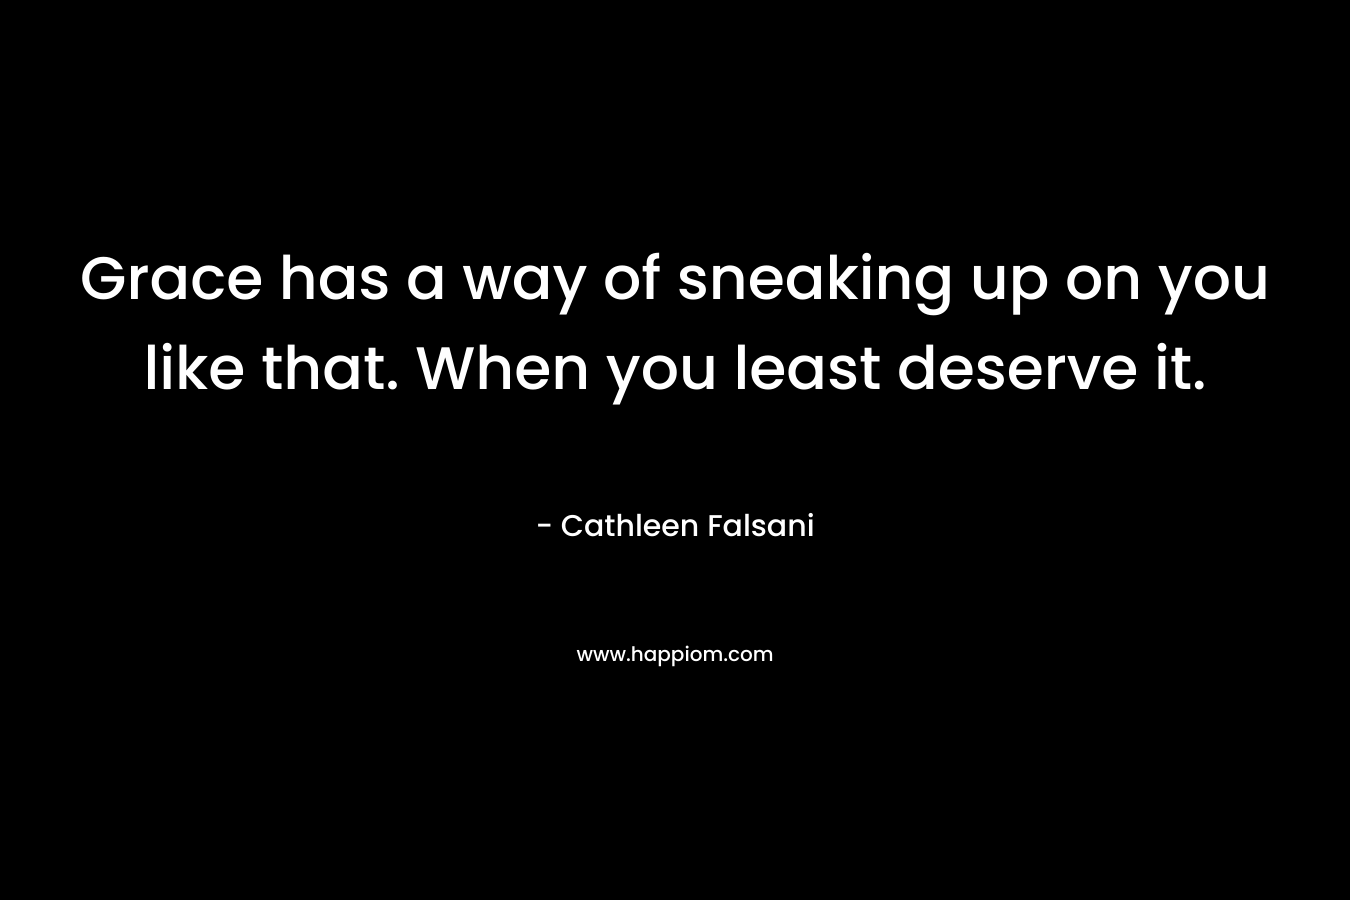 Grace has a way of sneaking up on you like that. When you least deserve it. – Cathleen Falsani